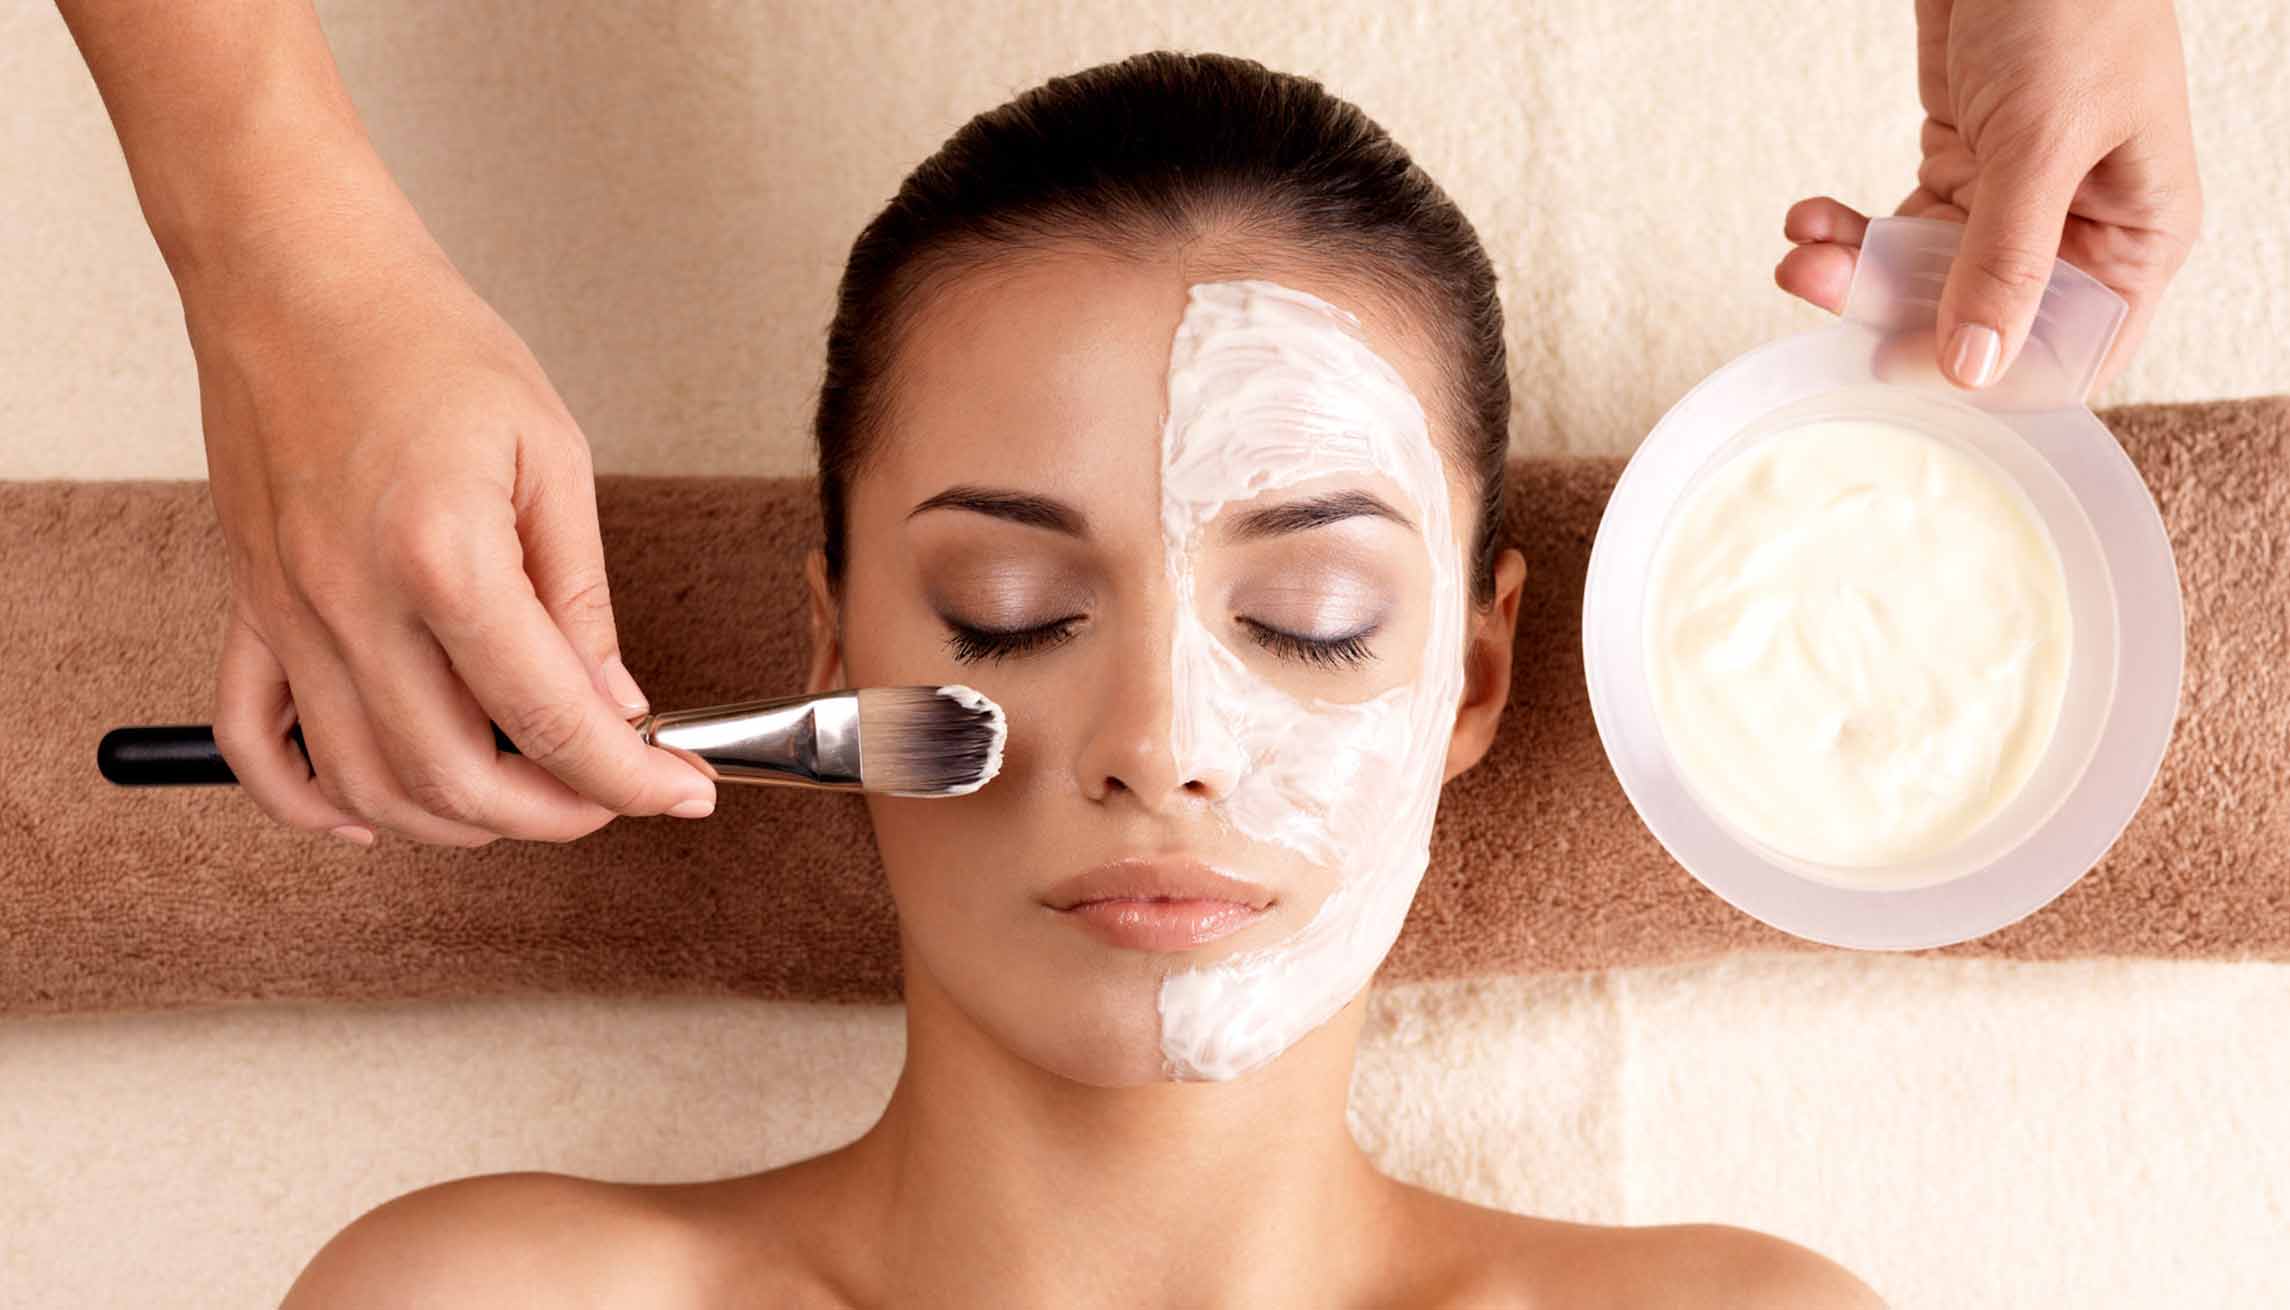 Featured image for “Skin Care At Center For Plastic Surgery”